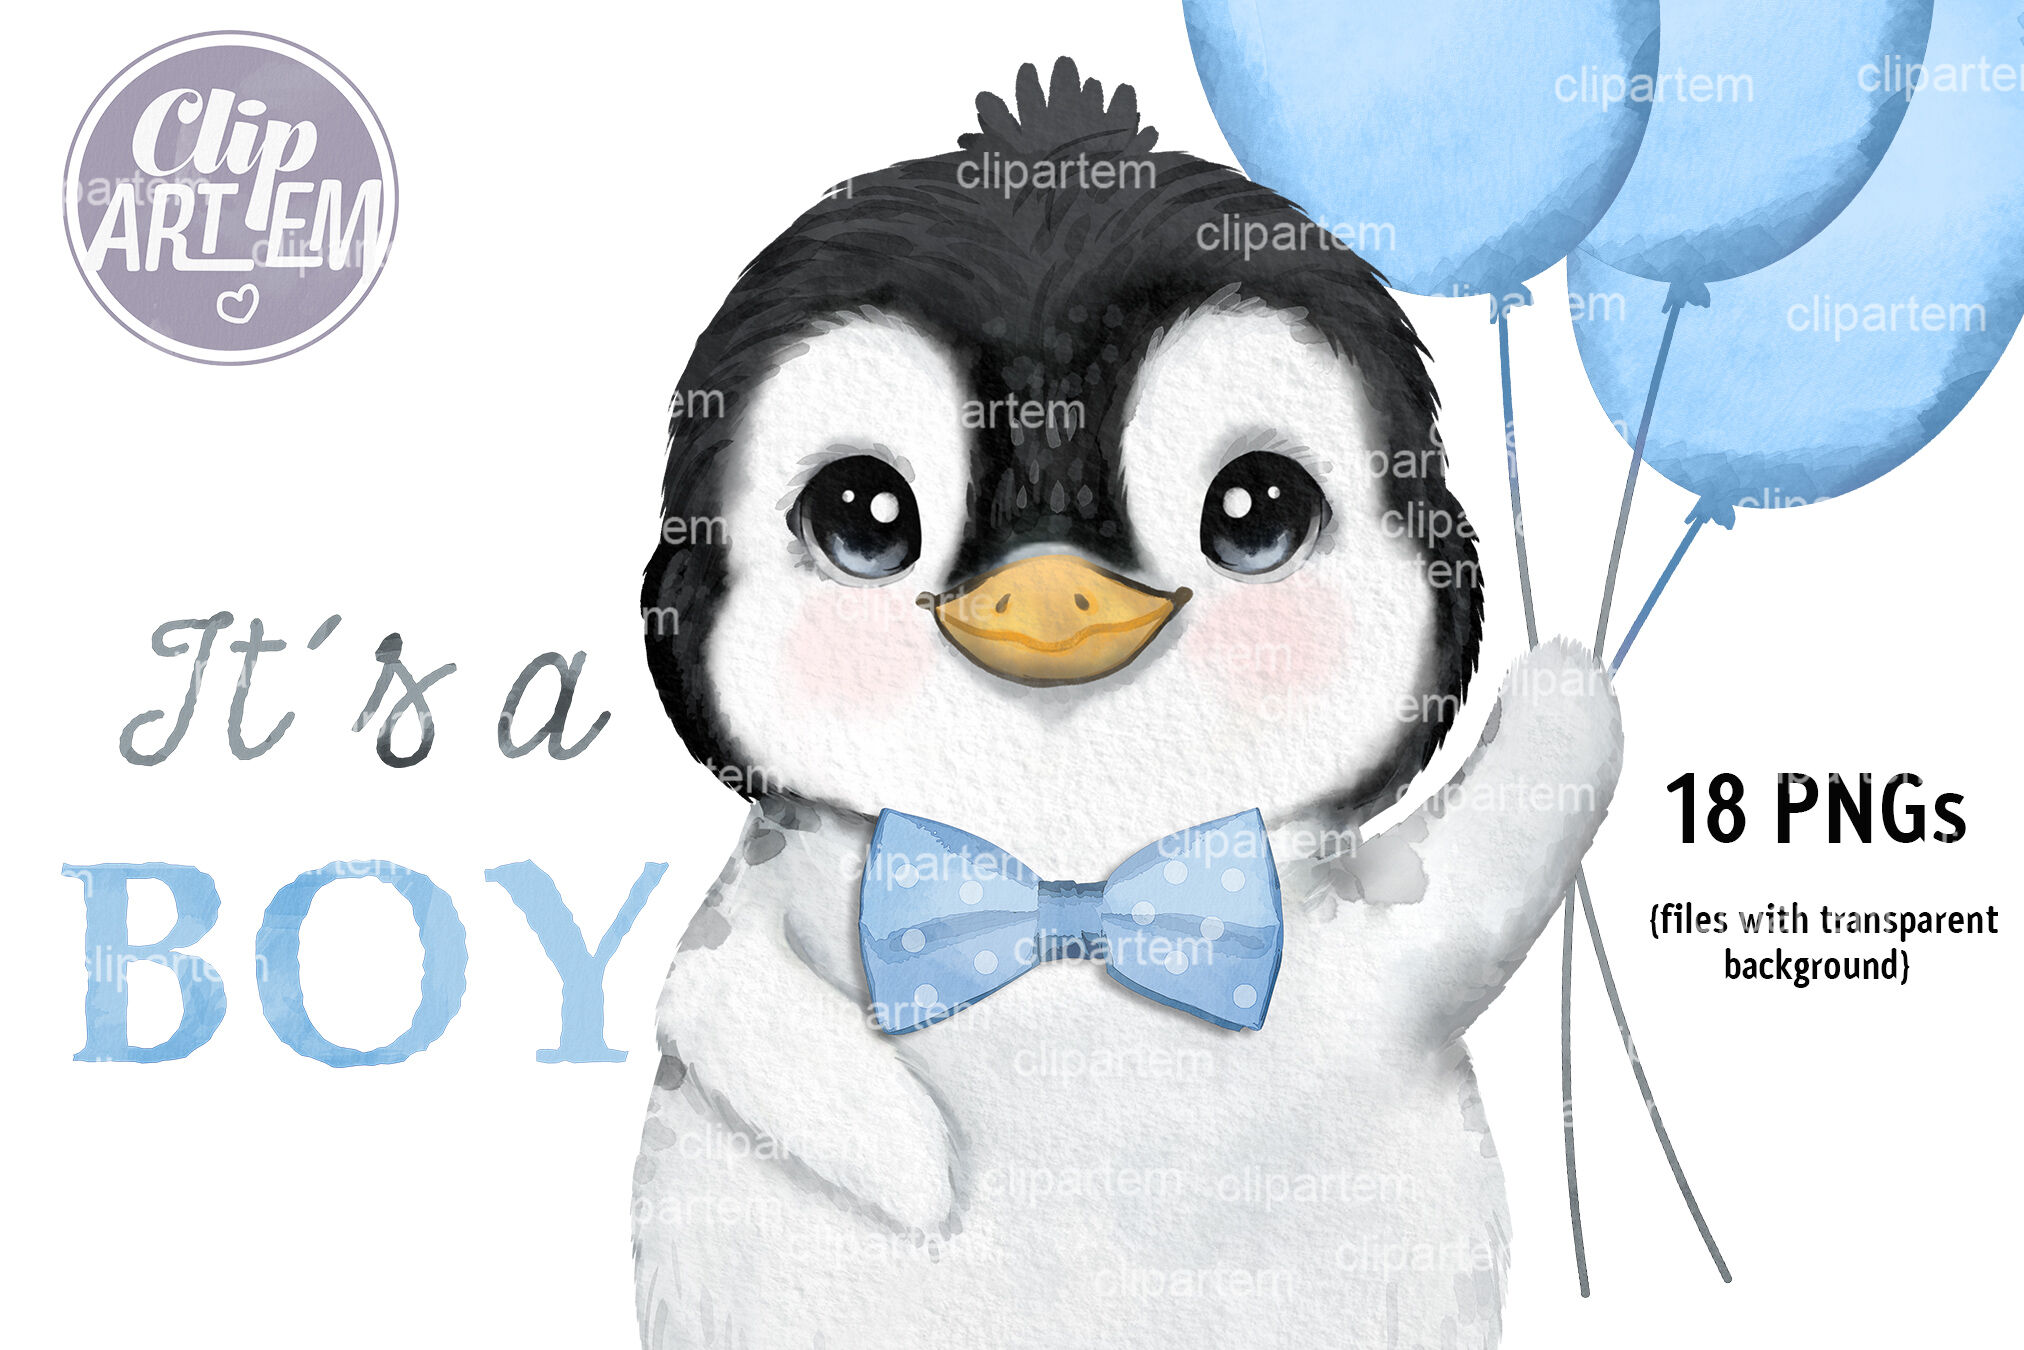 Cute Baby Penguin Sleeping on the Crescent Clipart Set, Watercolor